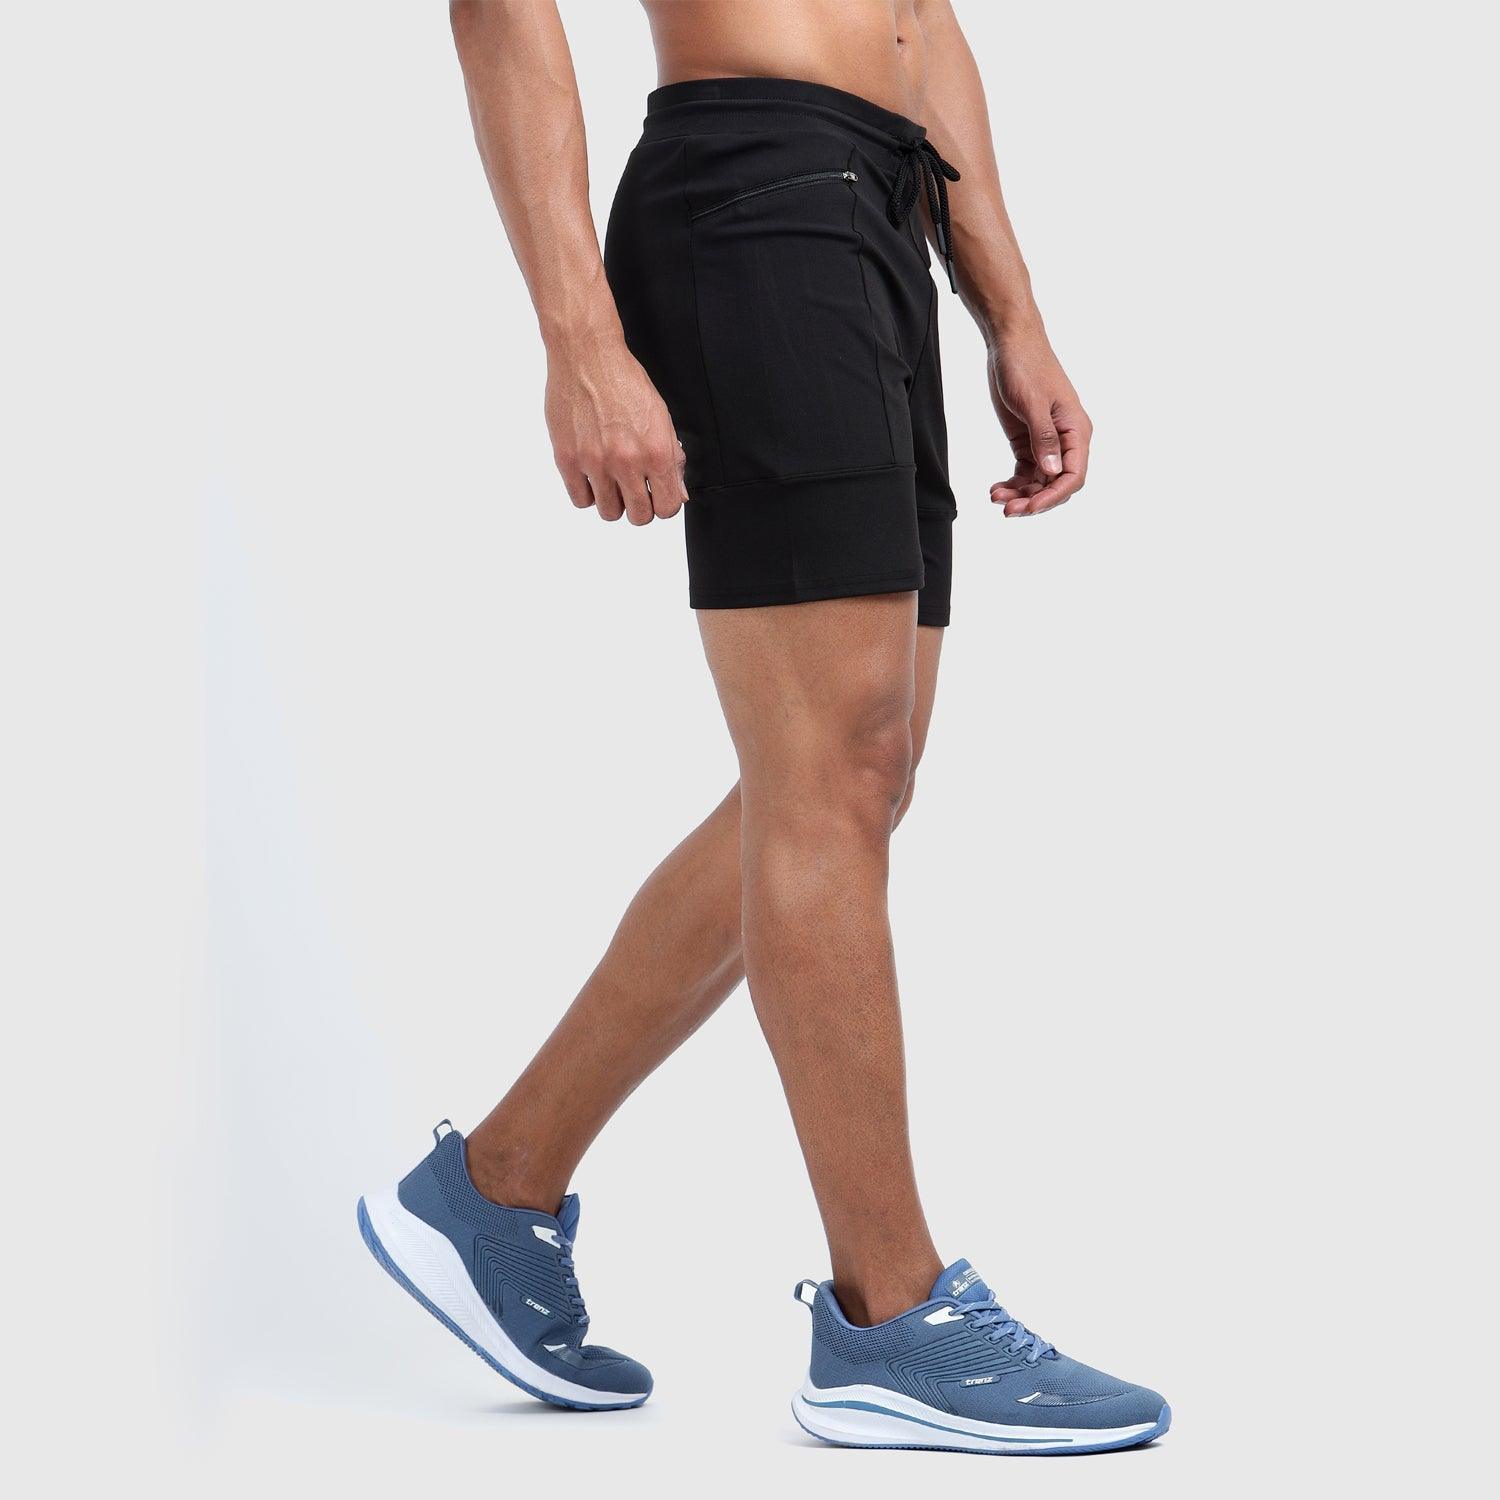 Denmonk's fashionable Power Shorts black shorts for men will boost your level of gym fitness.